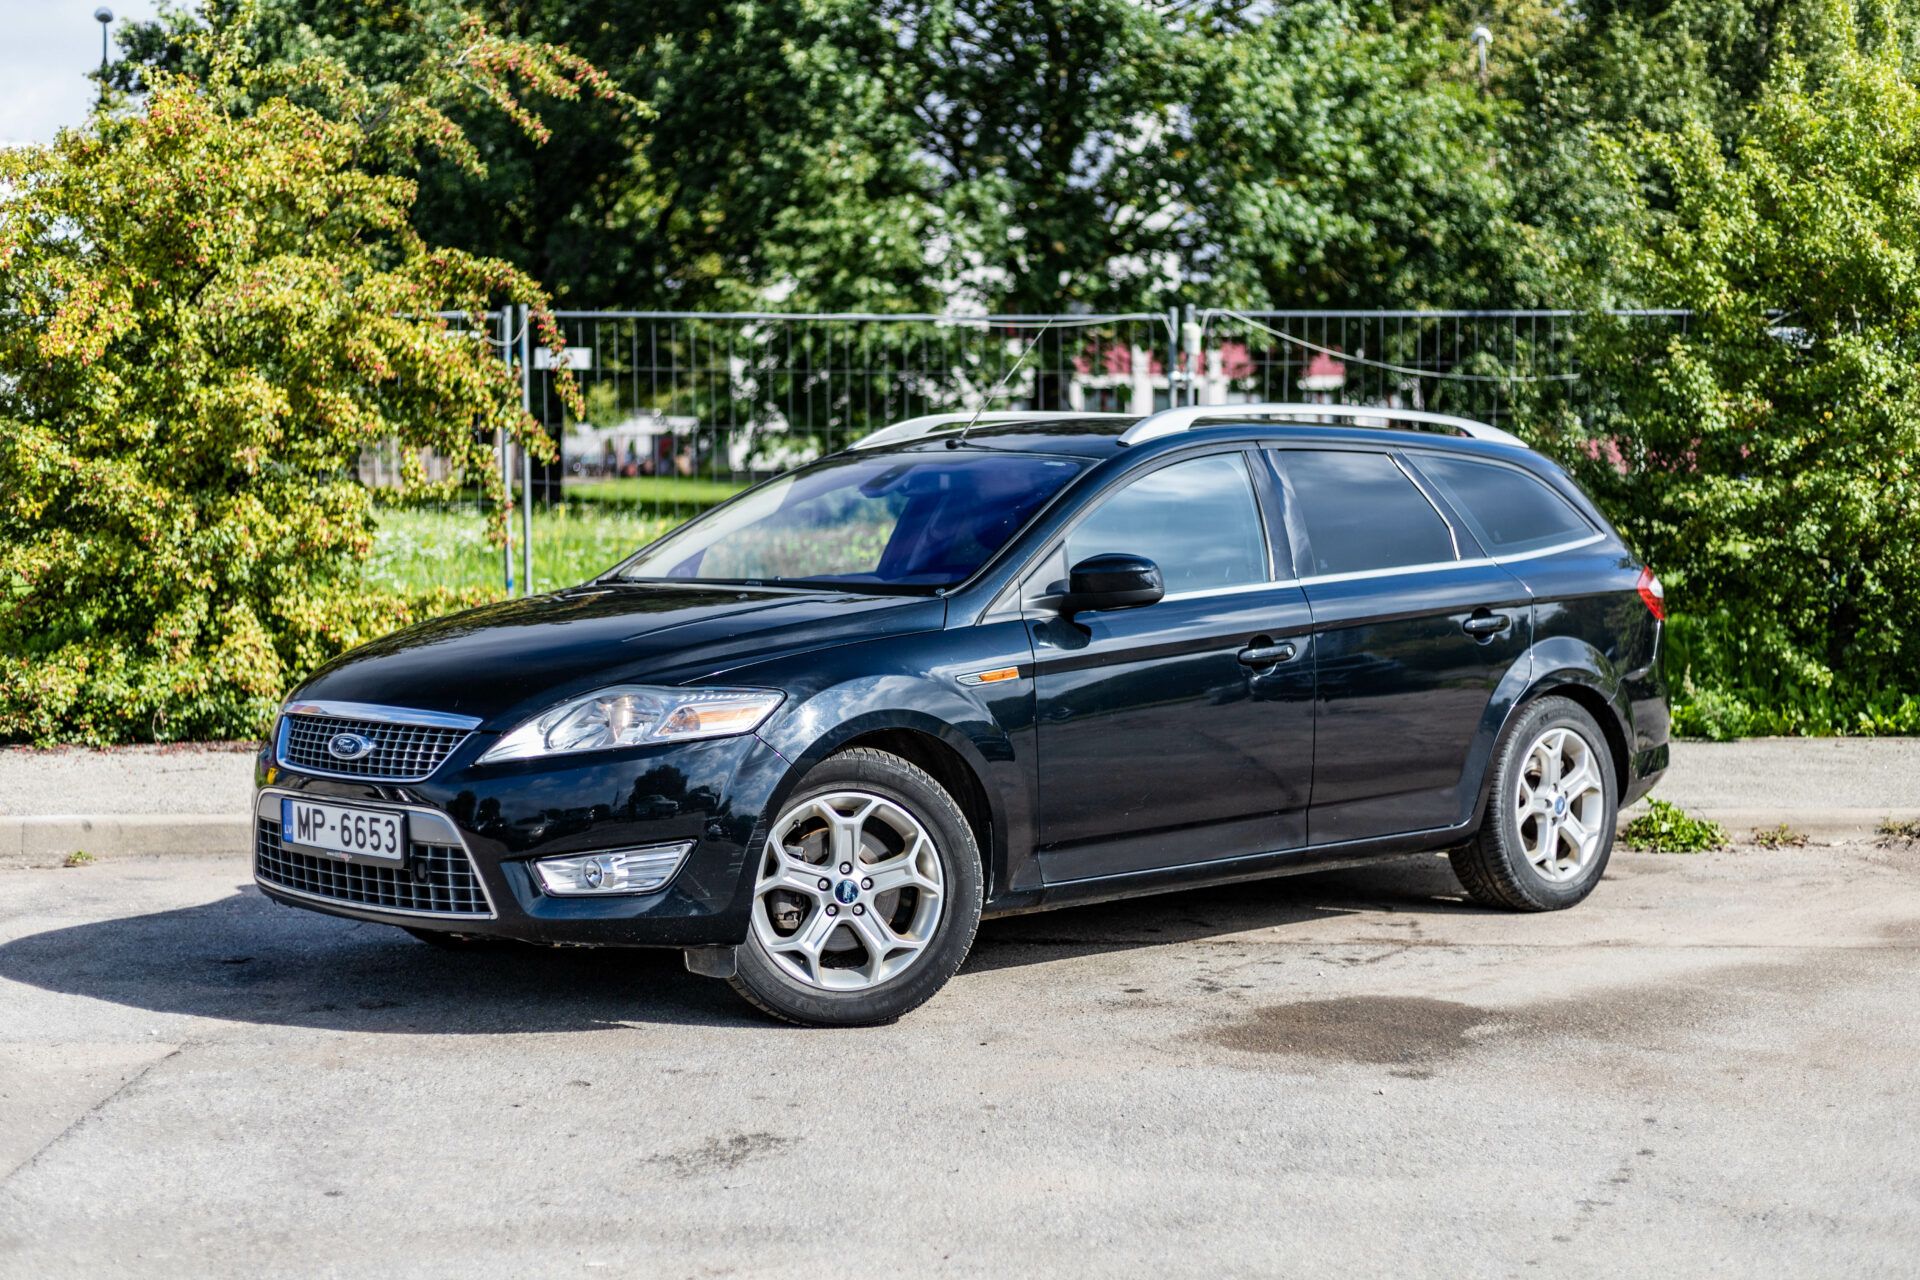 FORD MONDEO | CarBuzz